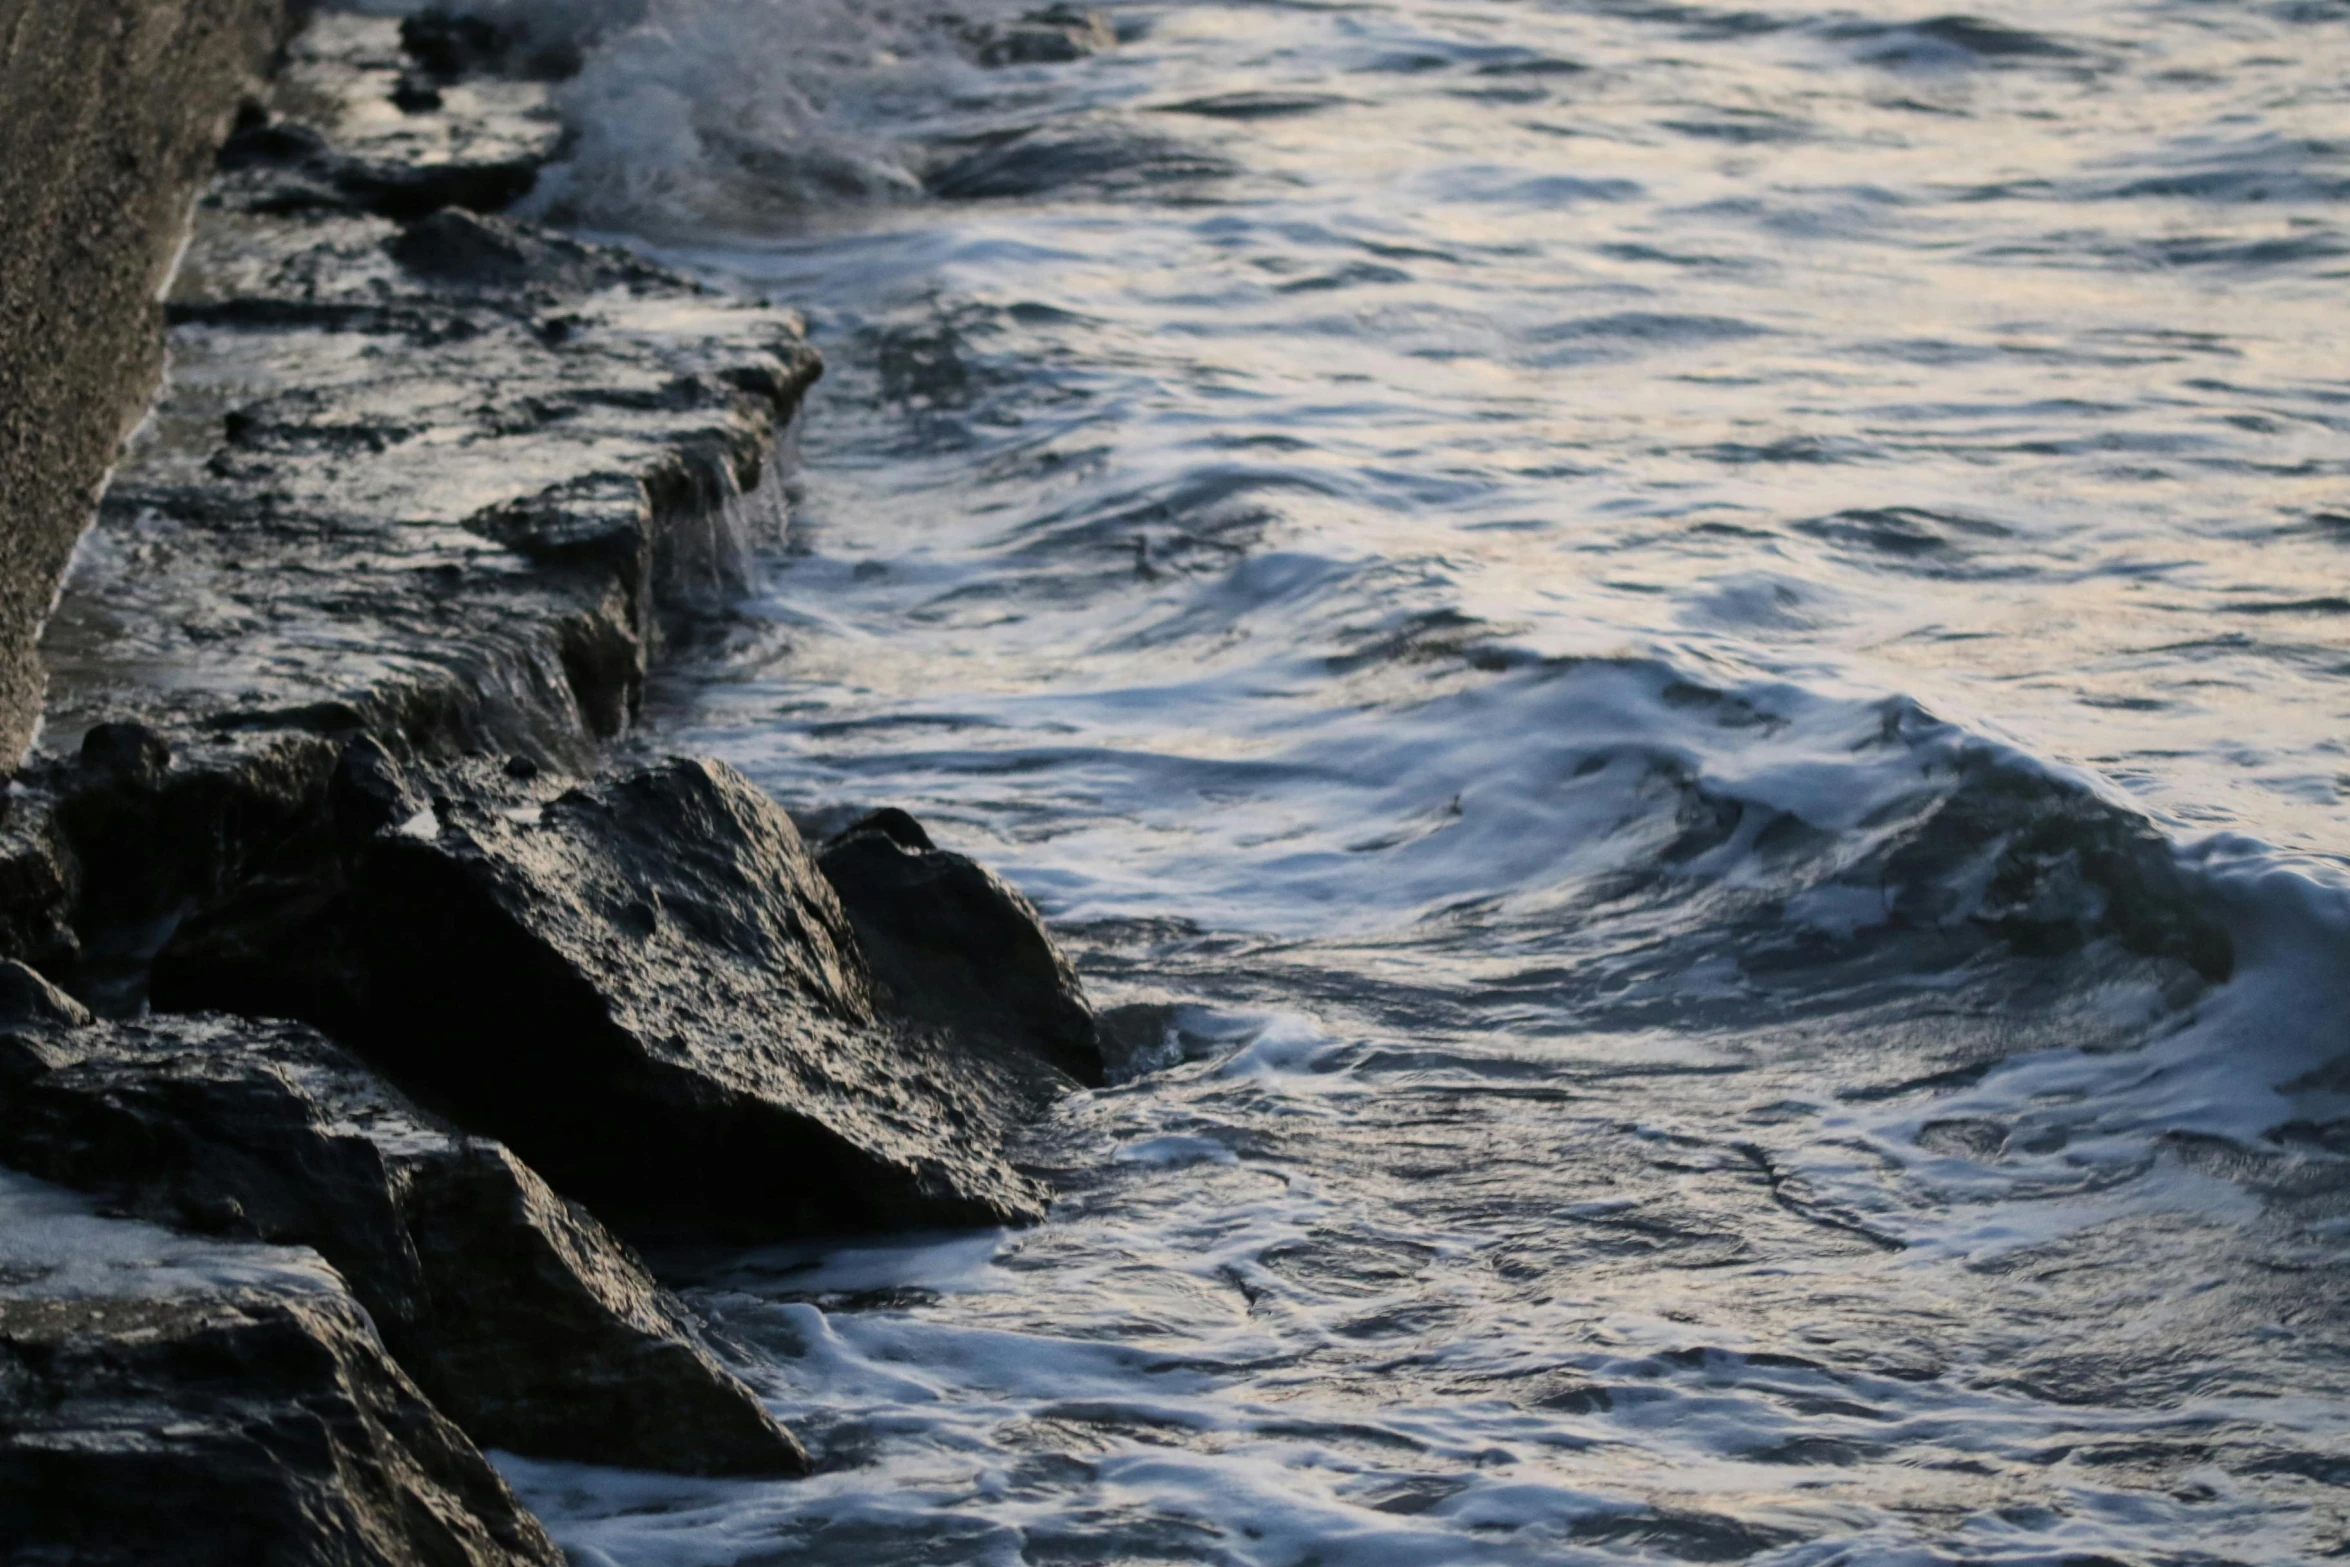 a close up s of the water next to rocks